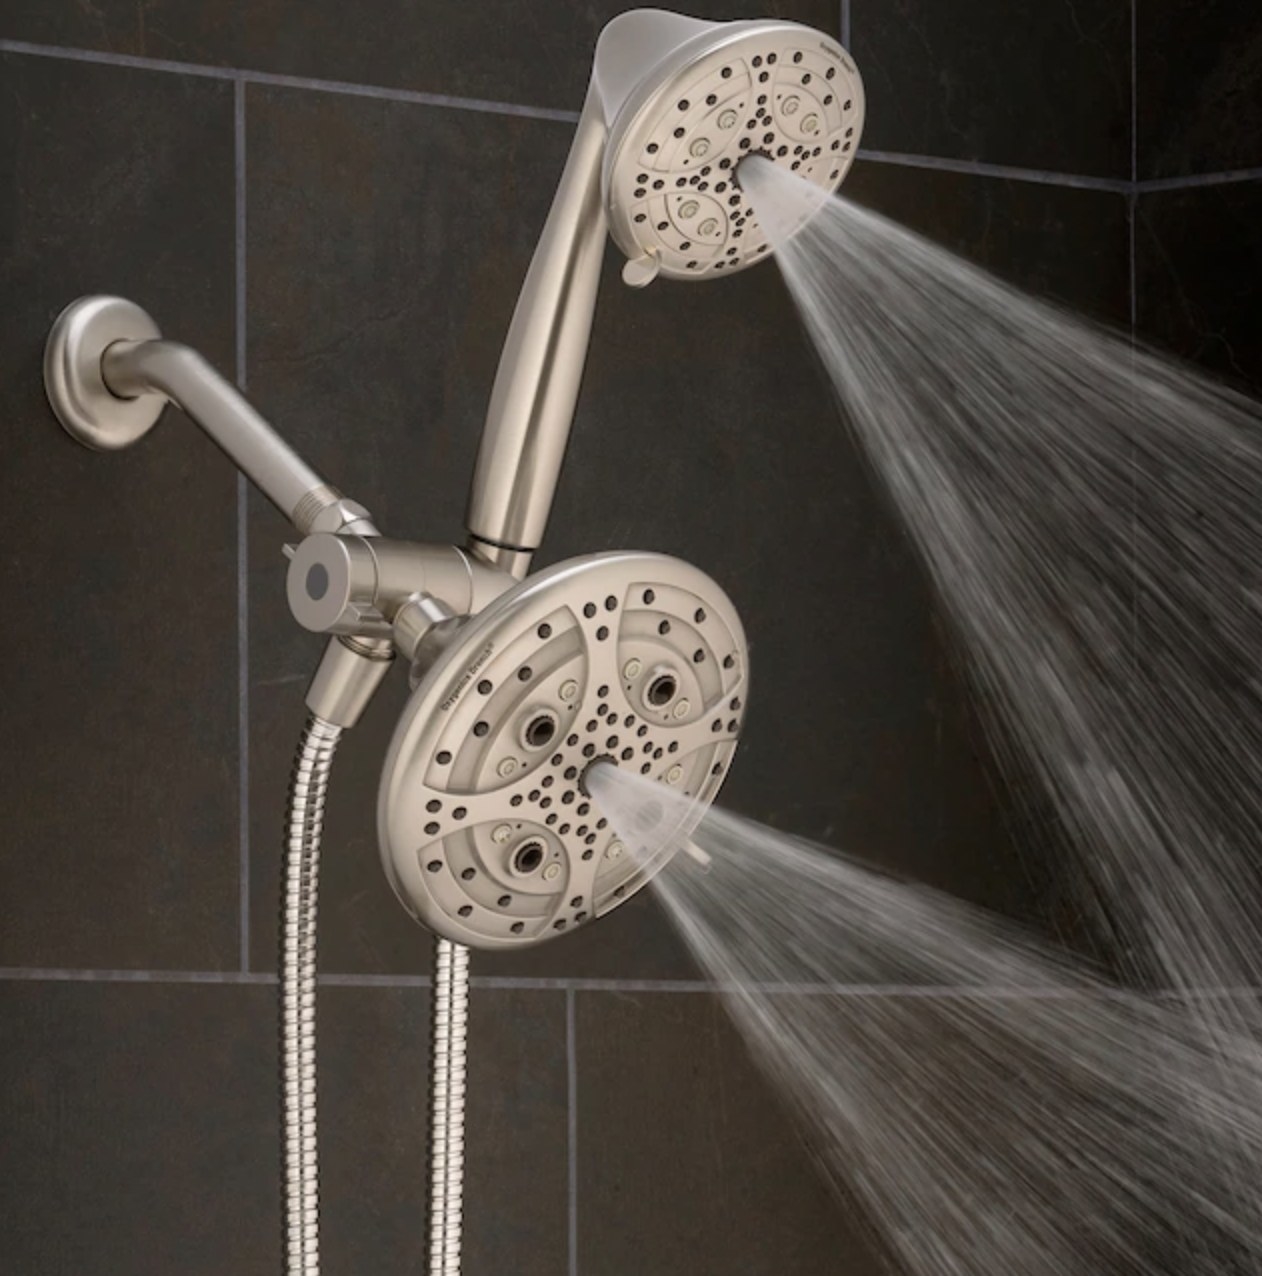 The dual shower head spraying water